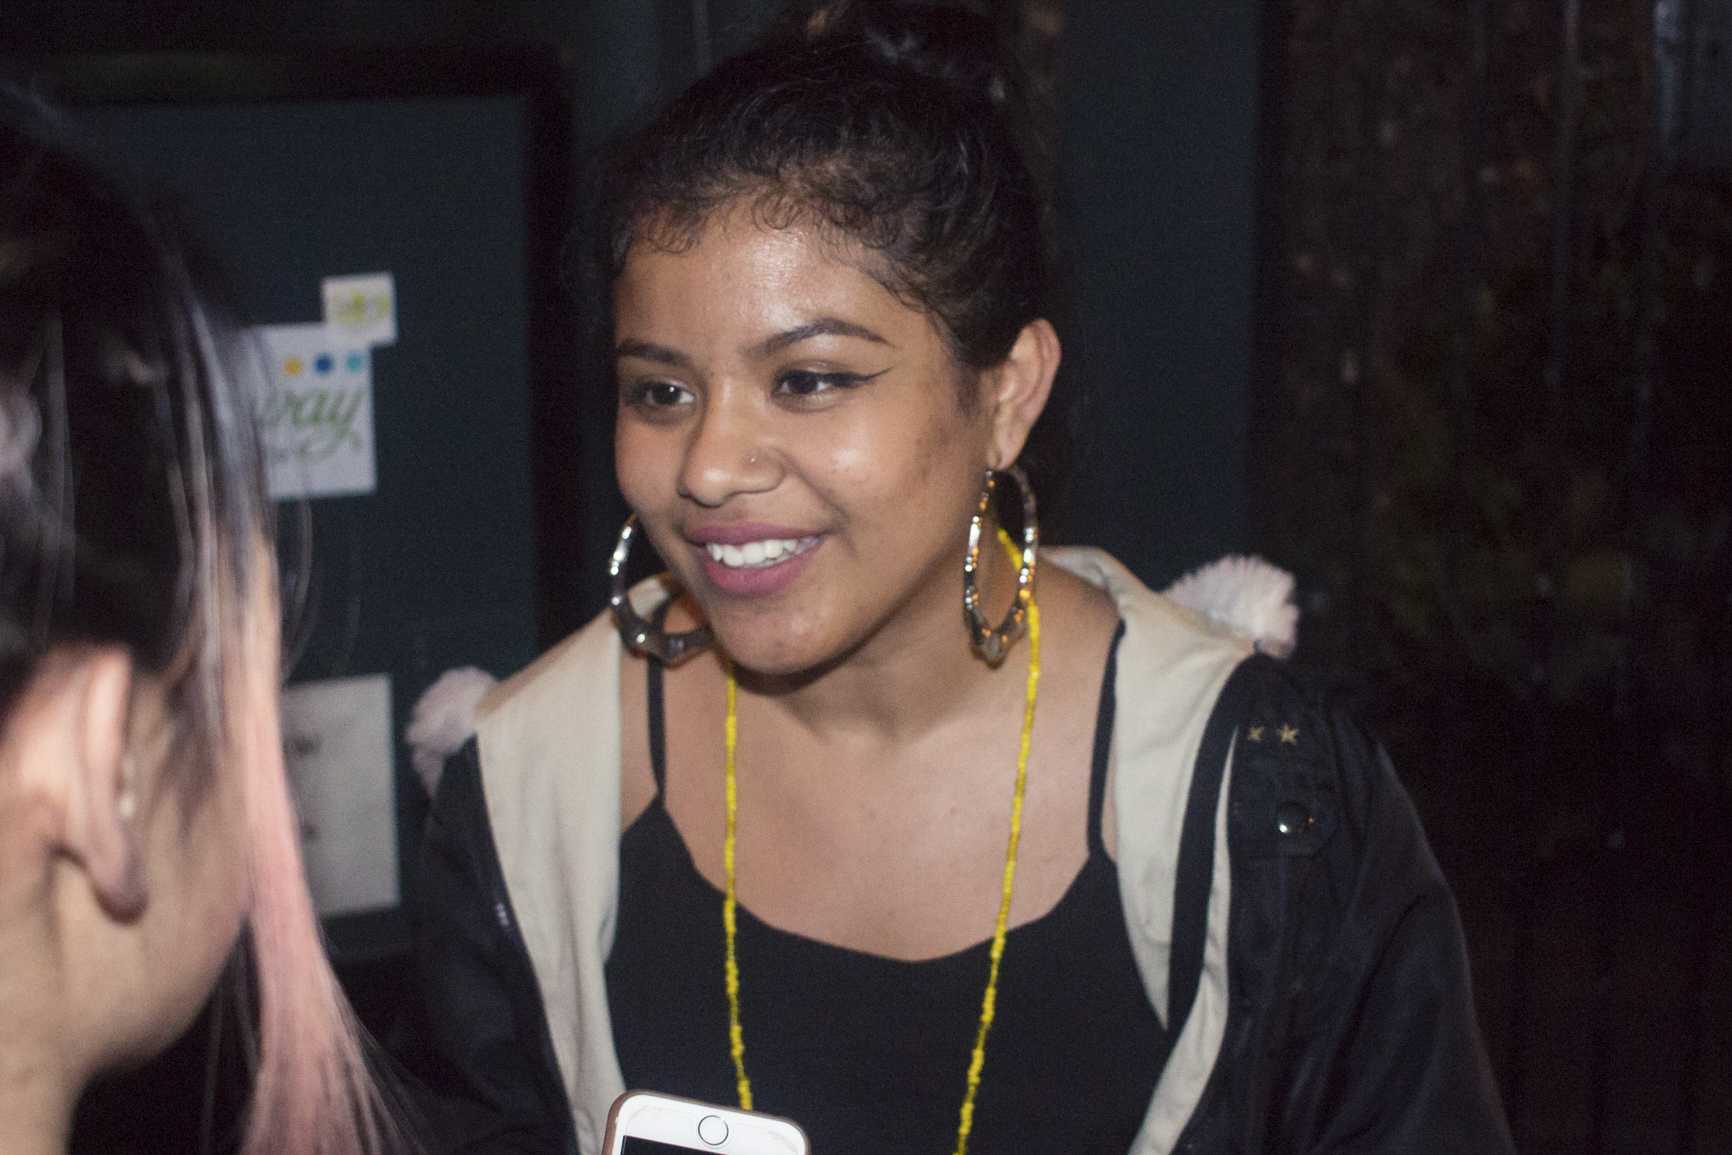  One of the younger performers on Tuesday night March 14th, 2017,  at Da Poetry Lounge, was 18 year old La Morenita. She meets to talk to people and fellow poets after the first half of the show. Los Angeles, Ca. (Photo: Jazz Shademan) 